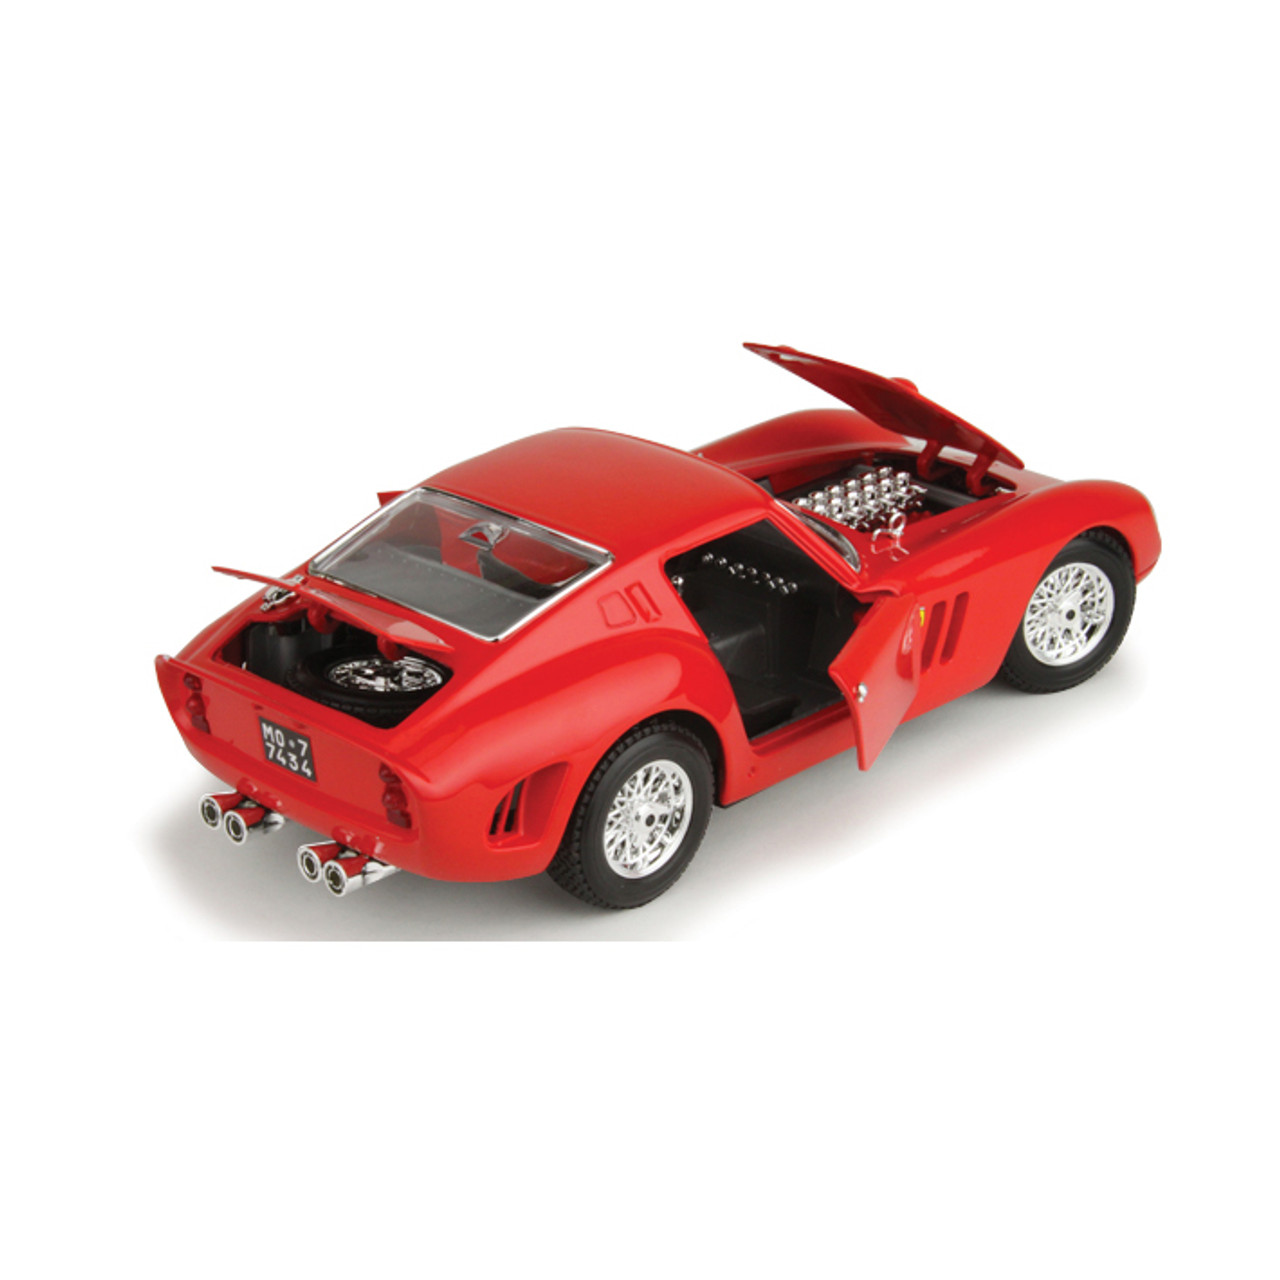 Ferrari 1:18 Scale Diecast & Toy Vehicles for sale